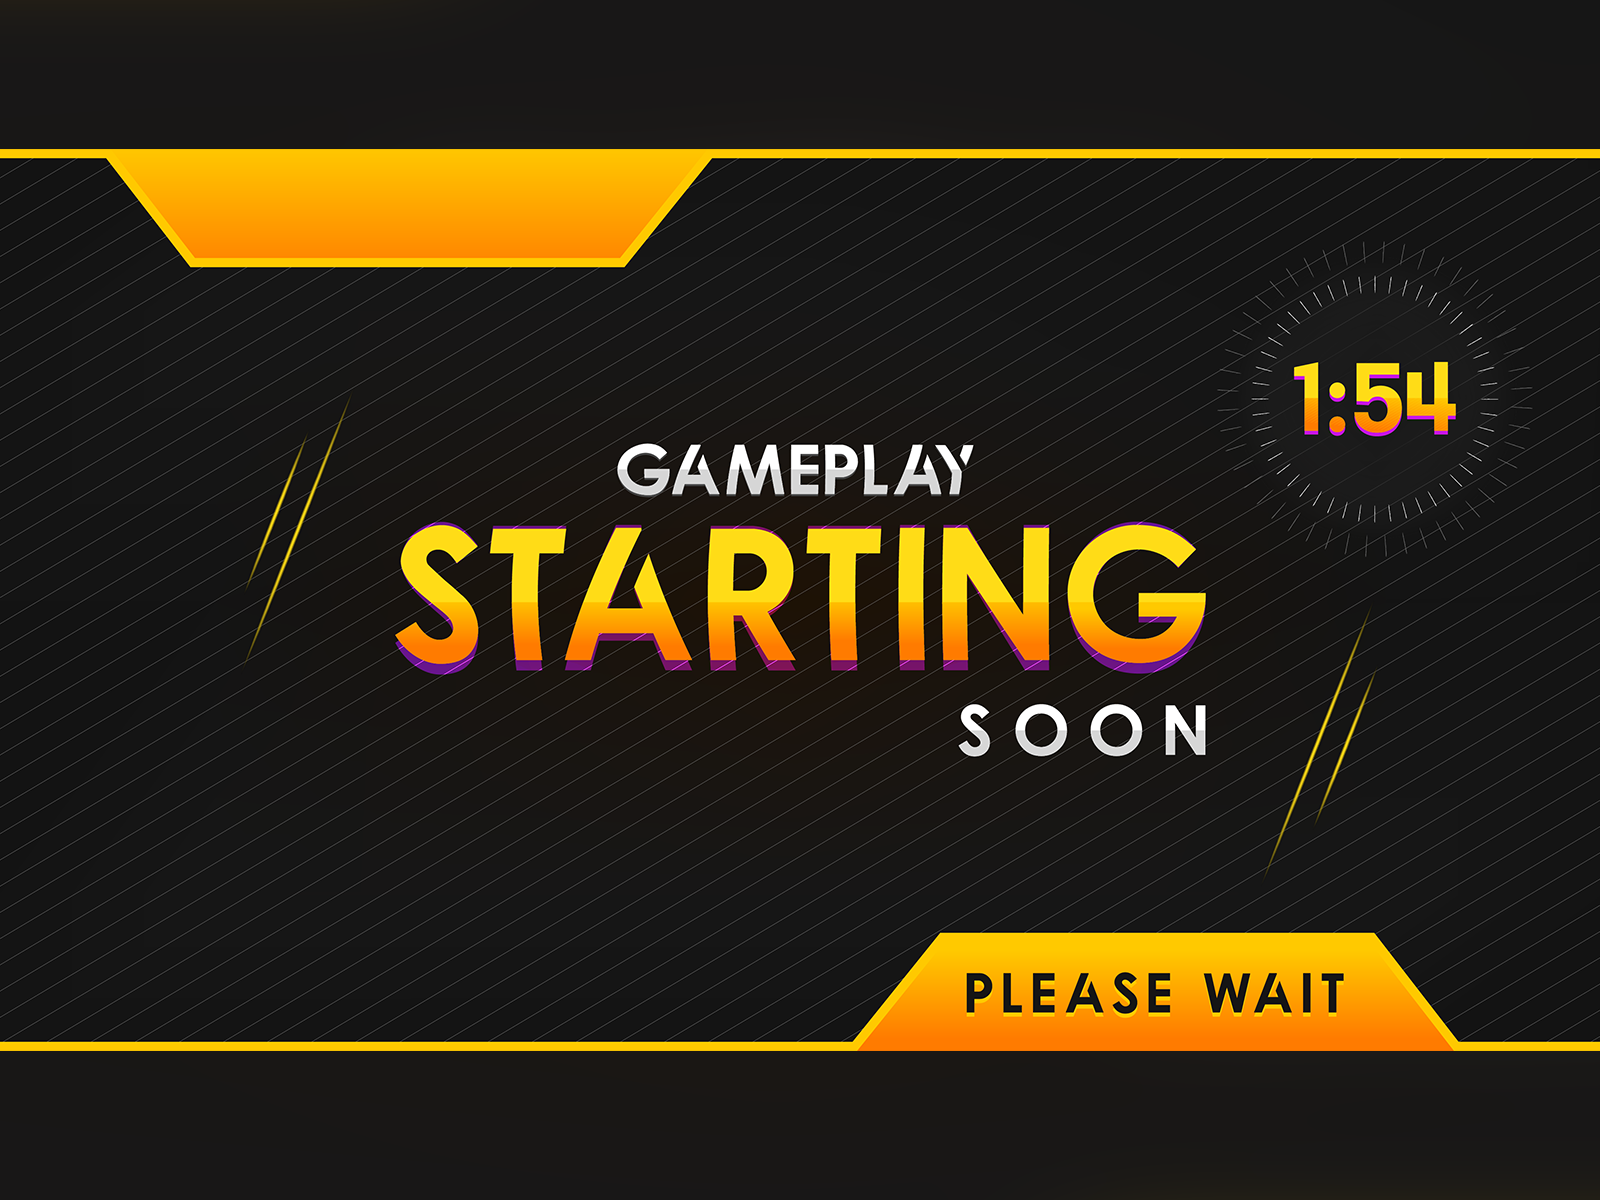 stream starting soon background by Ammad khan on Dribbble